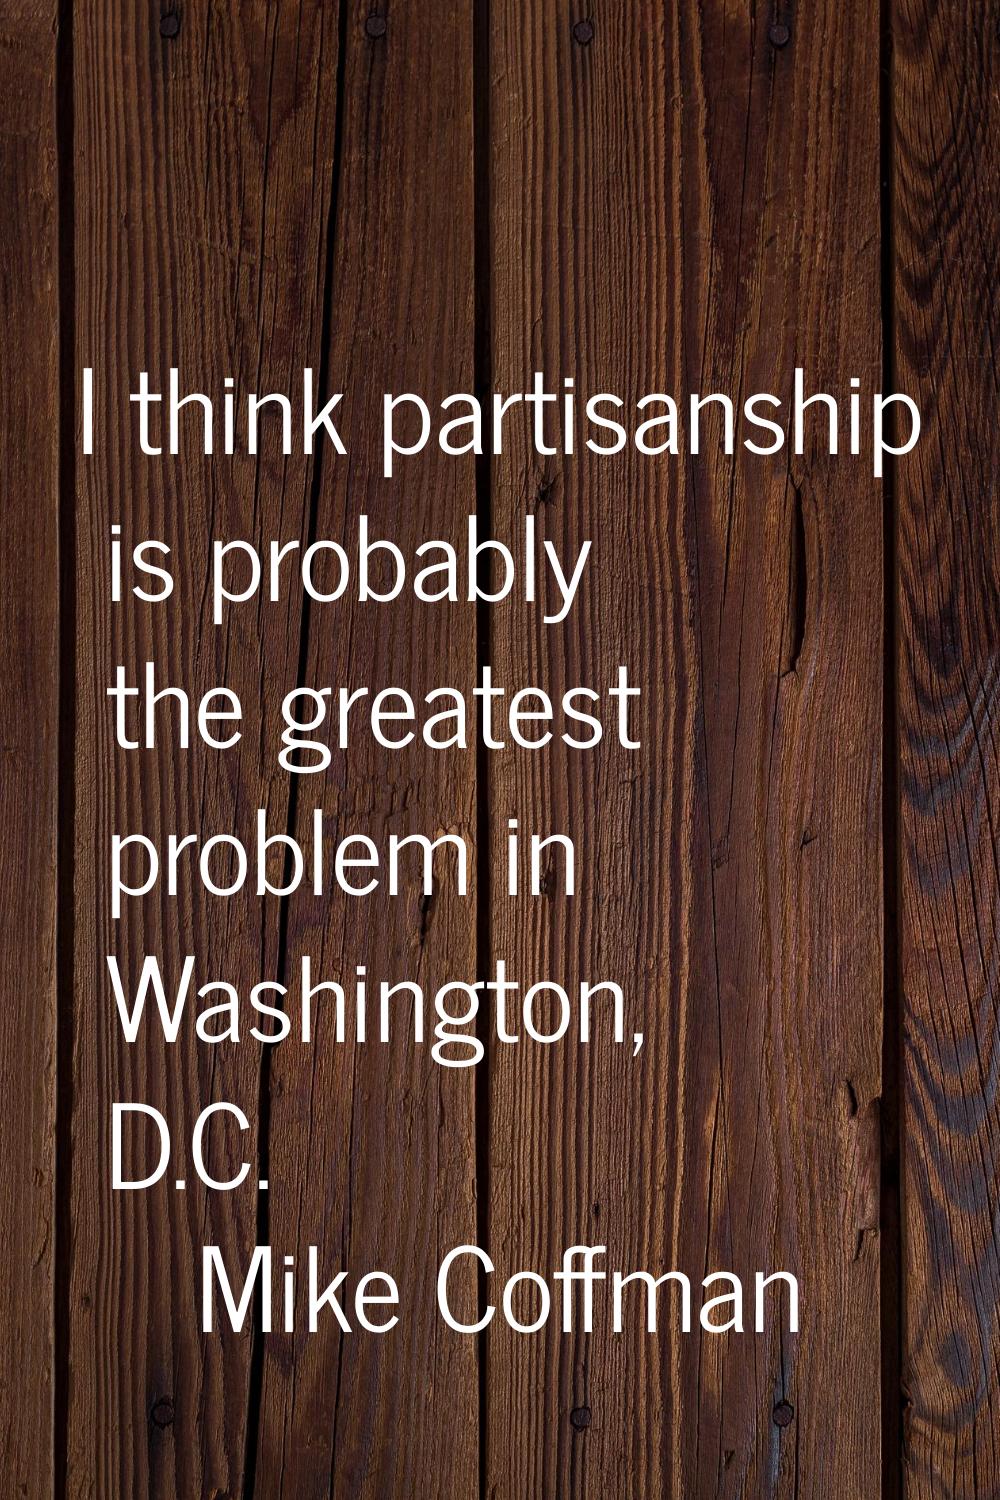 I think partisanship is probably the greatest problem in Washington, D.C.